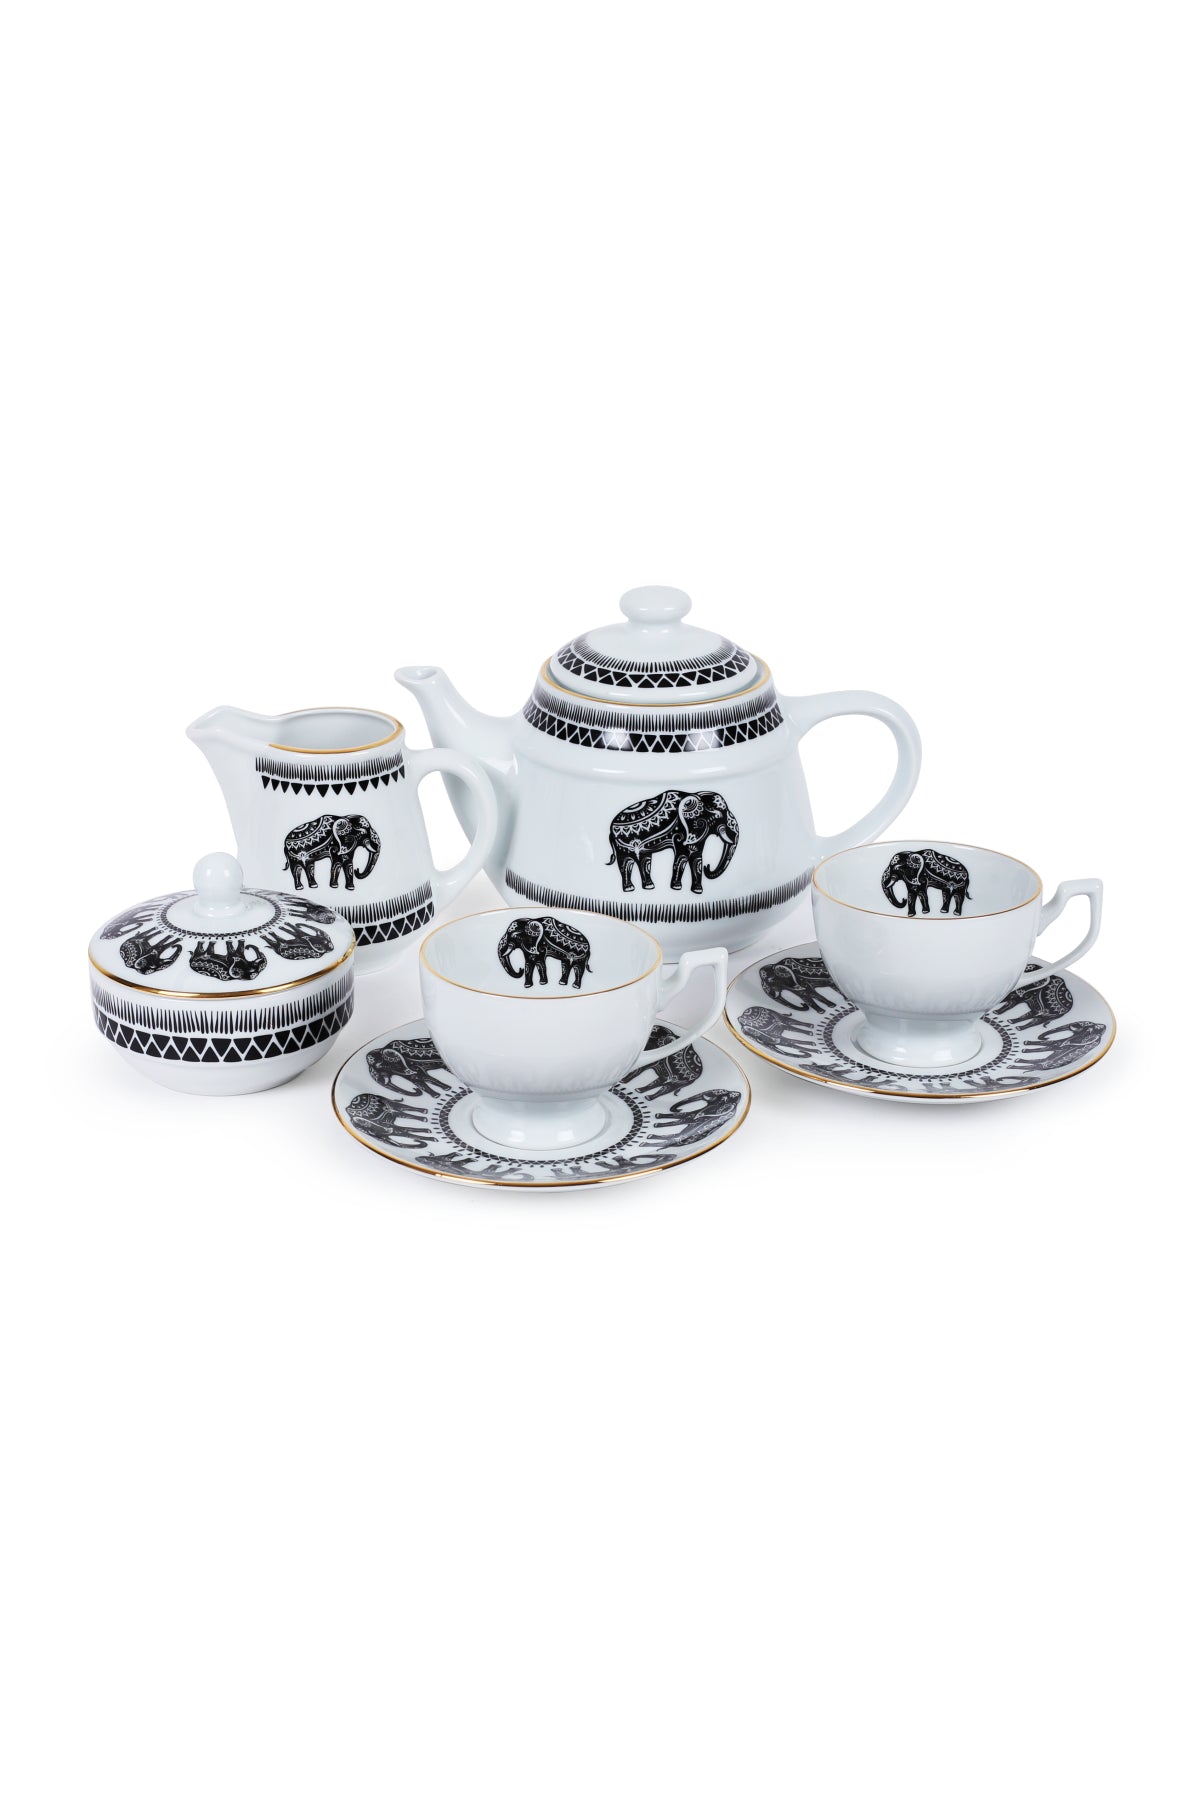 Some Wild Collection-Tea Set of 5 Pieces